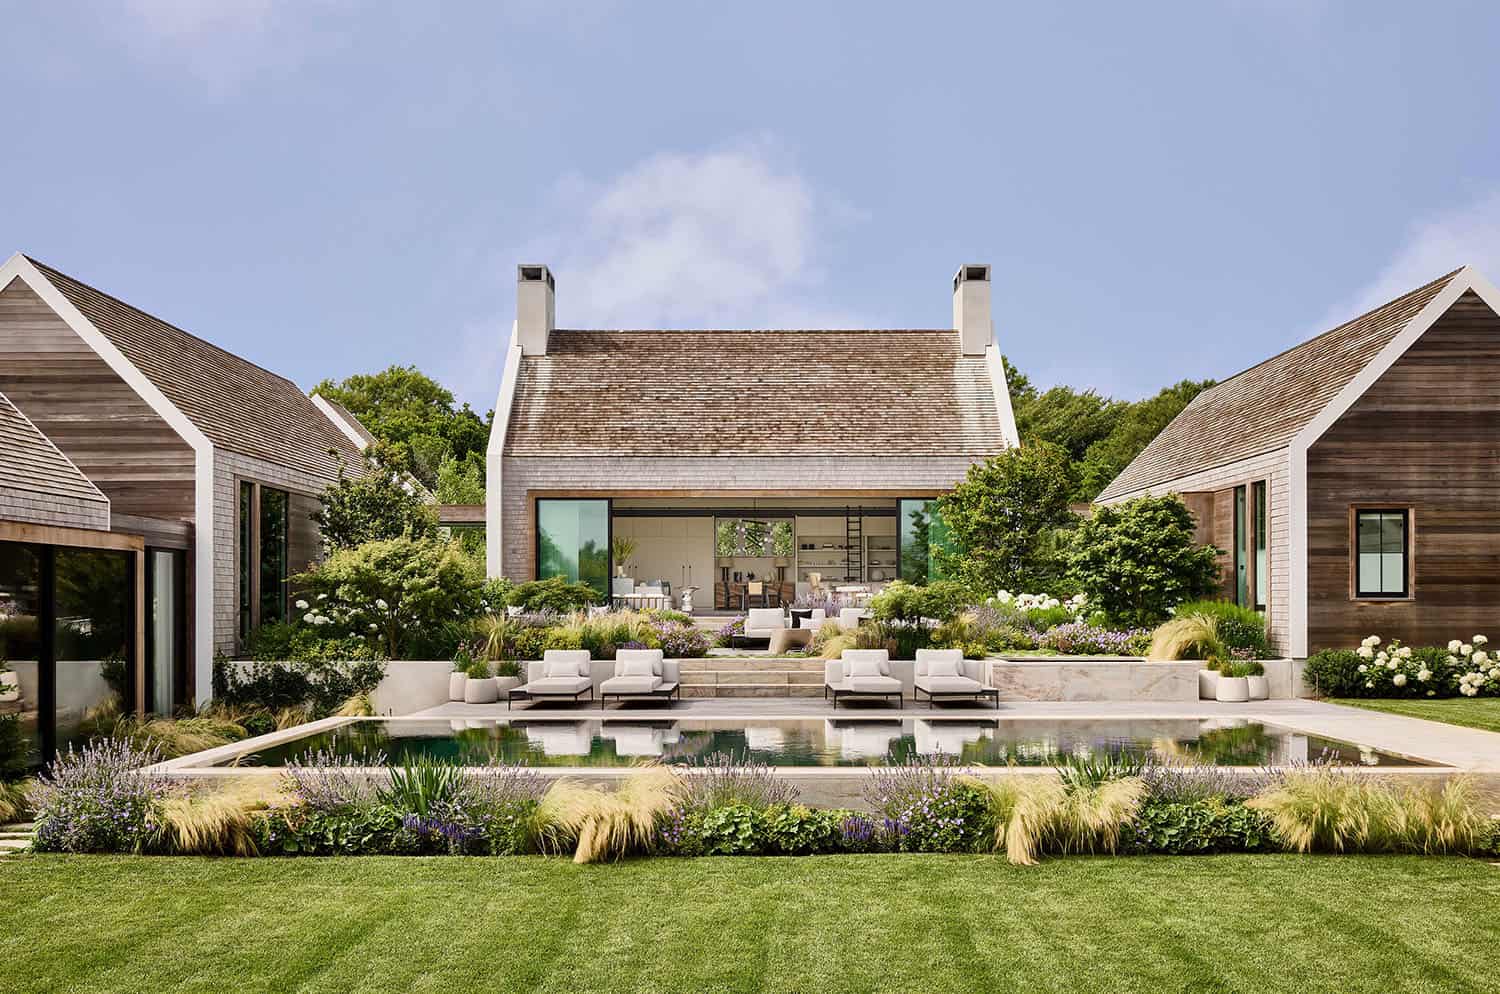 Step into a modern Nantucket sanctuary complete with a secret garden